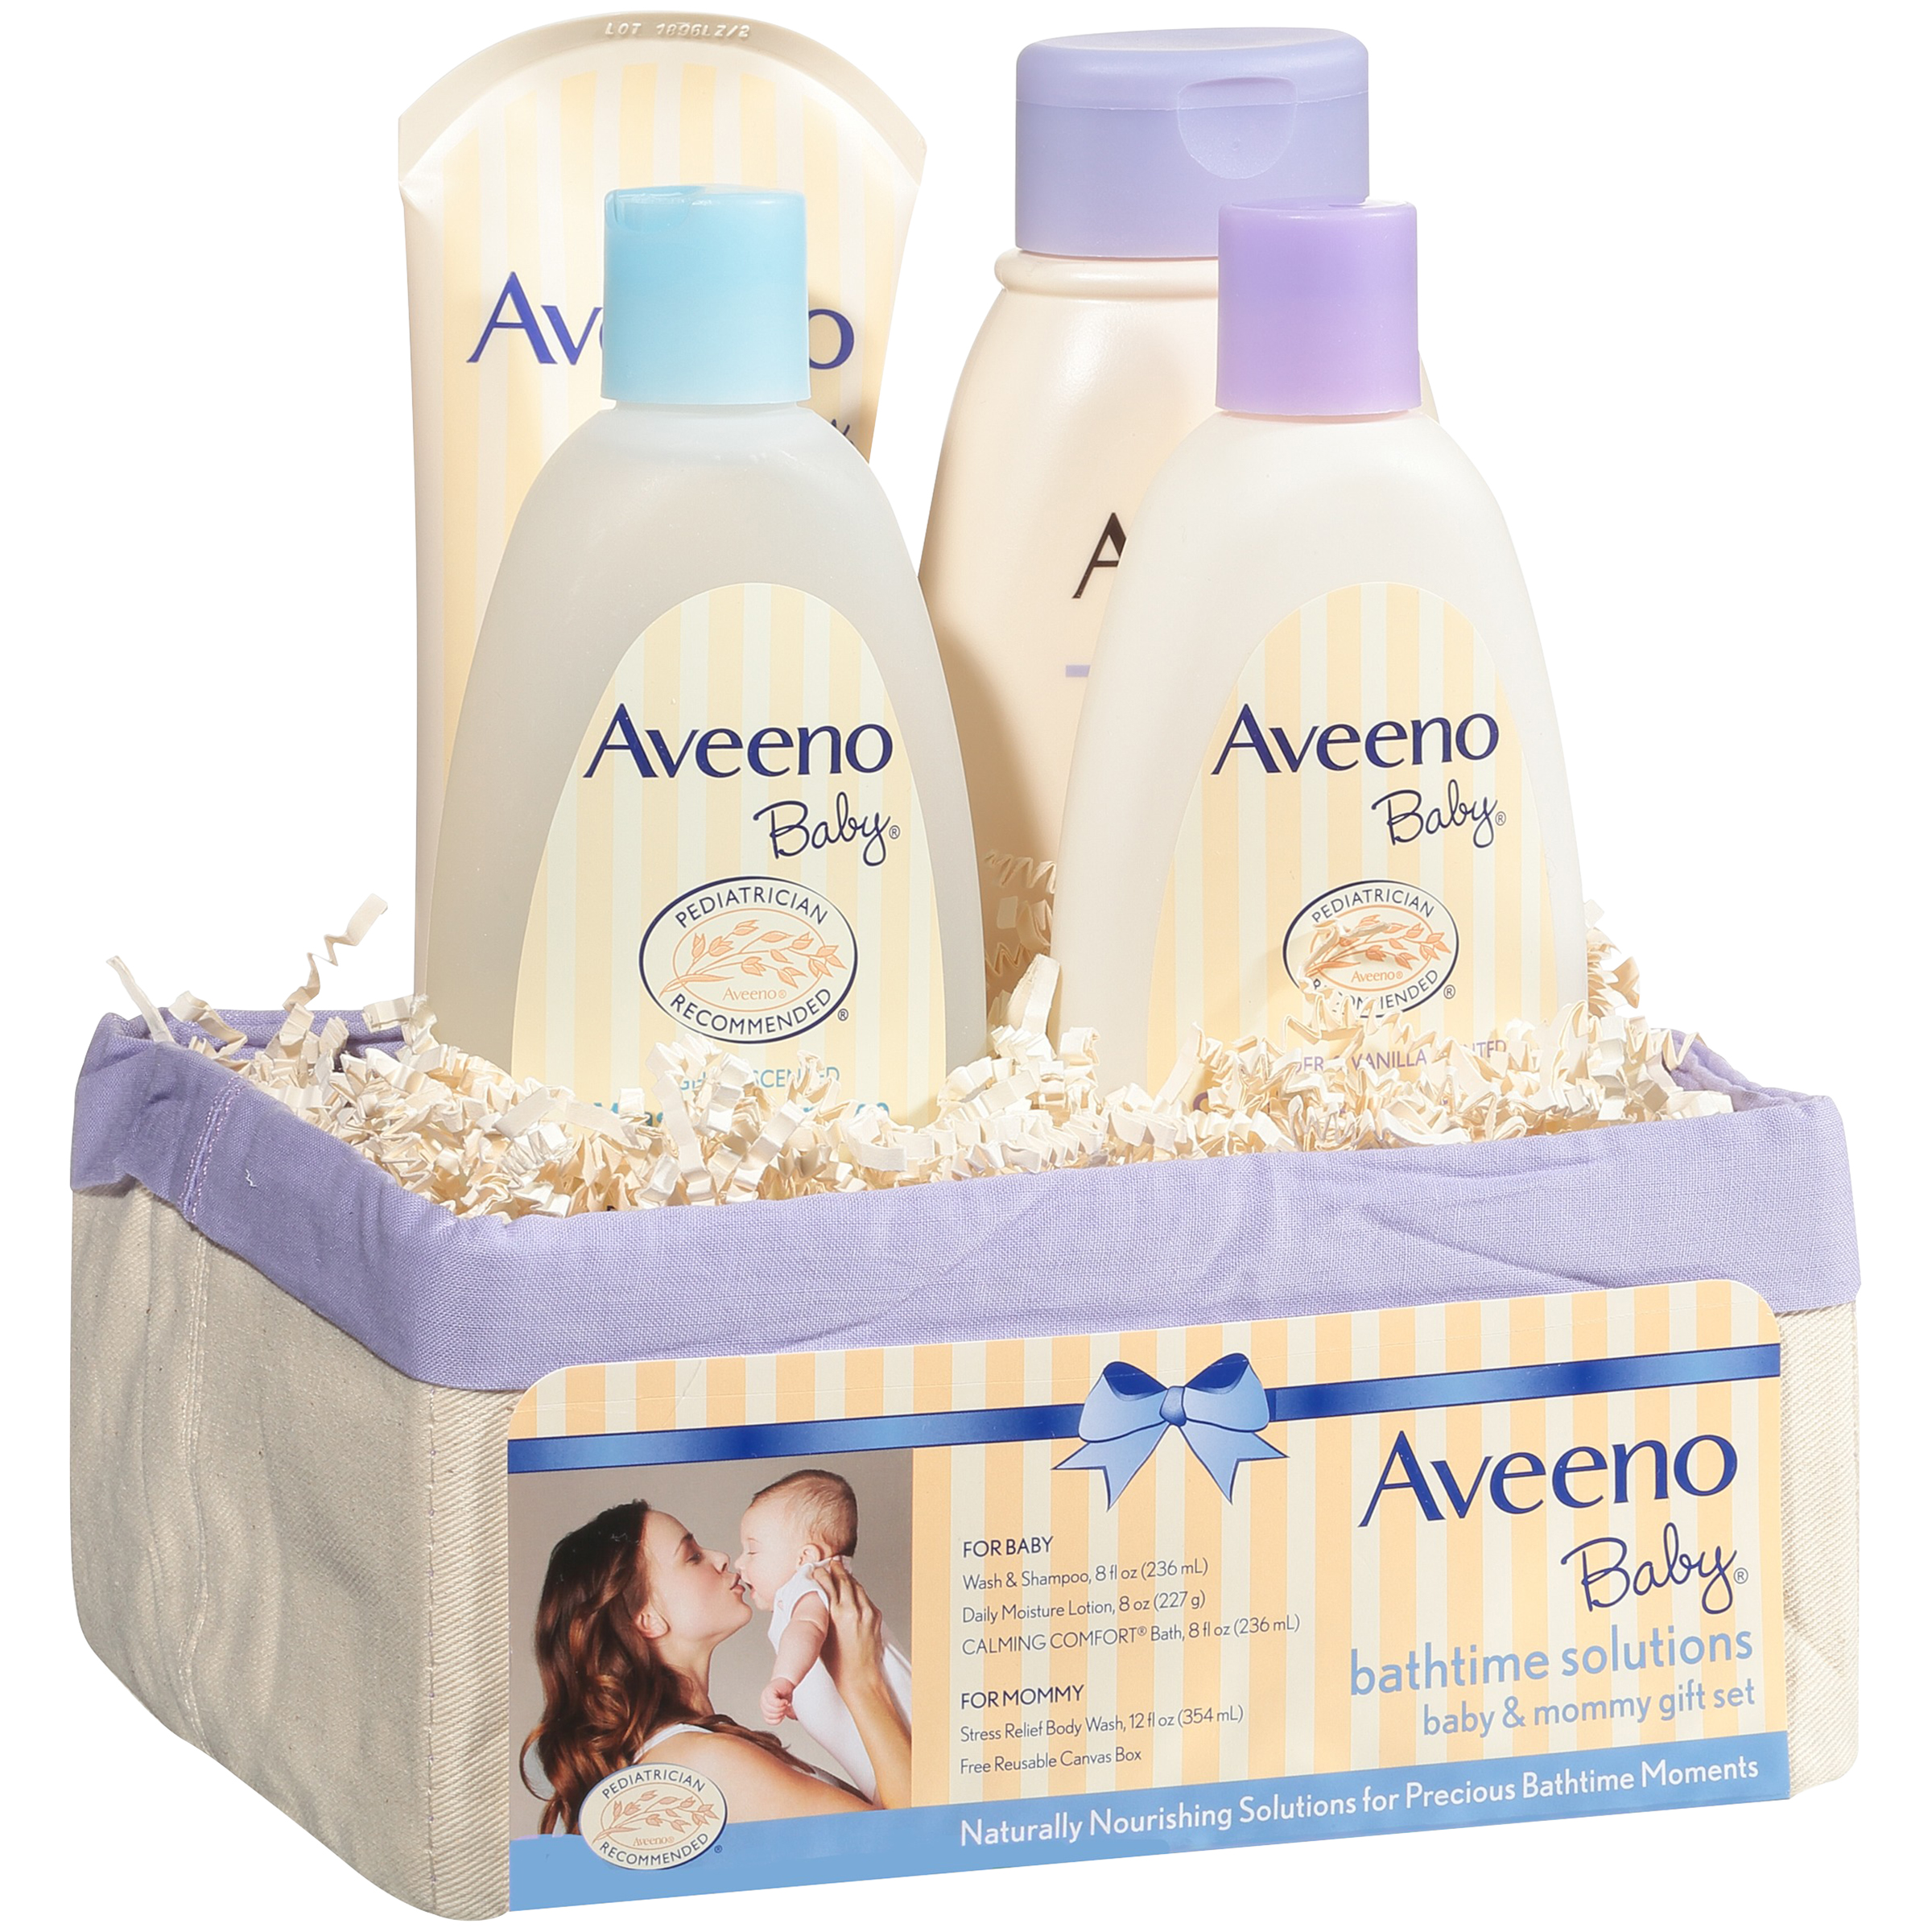 Aveeno  Baby Daily Bathtime Solutions Gift Set, 4 items